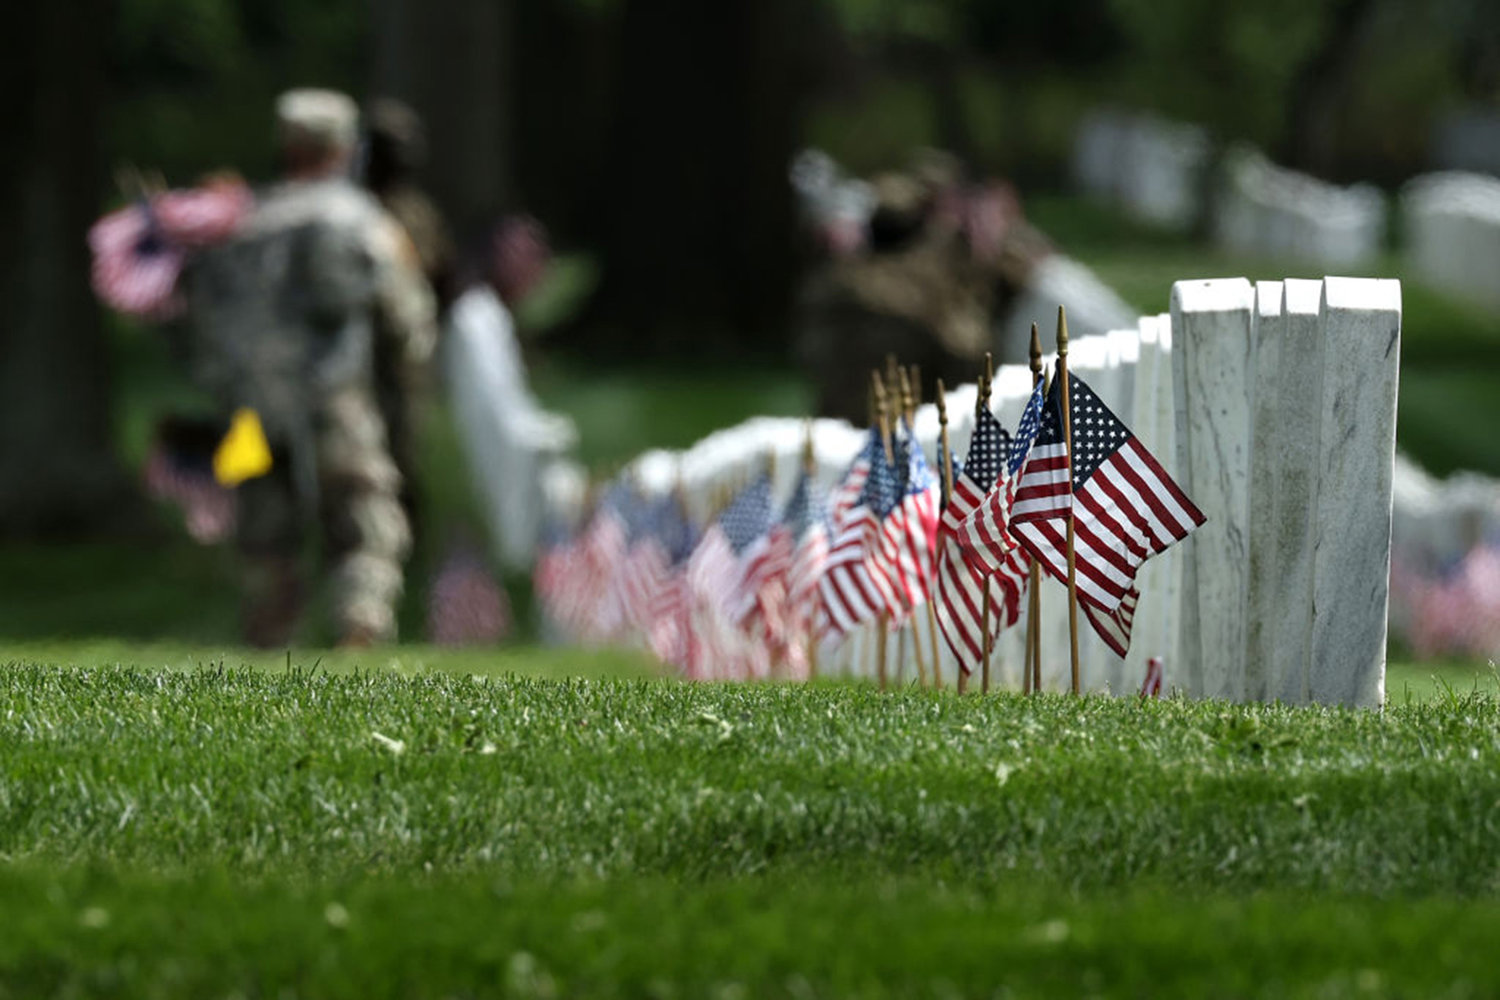 U.S. flags are placed in front of every grave site ahead of Memorial Day weekend in Arlington National Cemetery on May 21, 2020, in Arlington, Virginia. Army Pfc. David Owens, killed in action during World War II, will be buried at Arlington National Cemetery. (Chip Somodevilla/Getty Images/TNS)